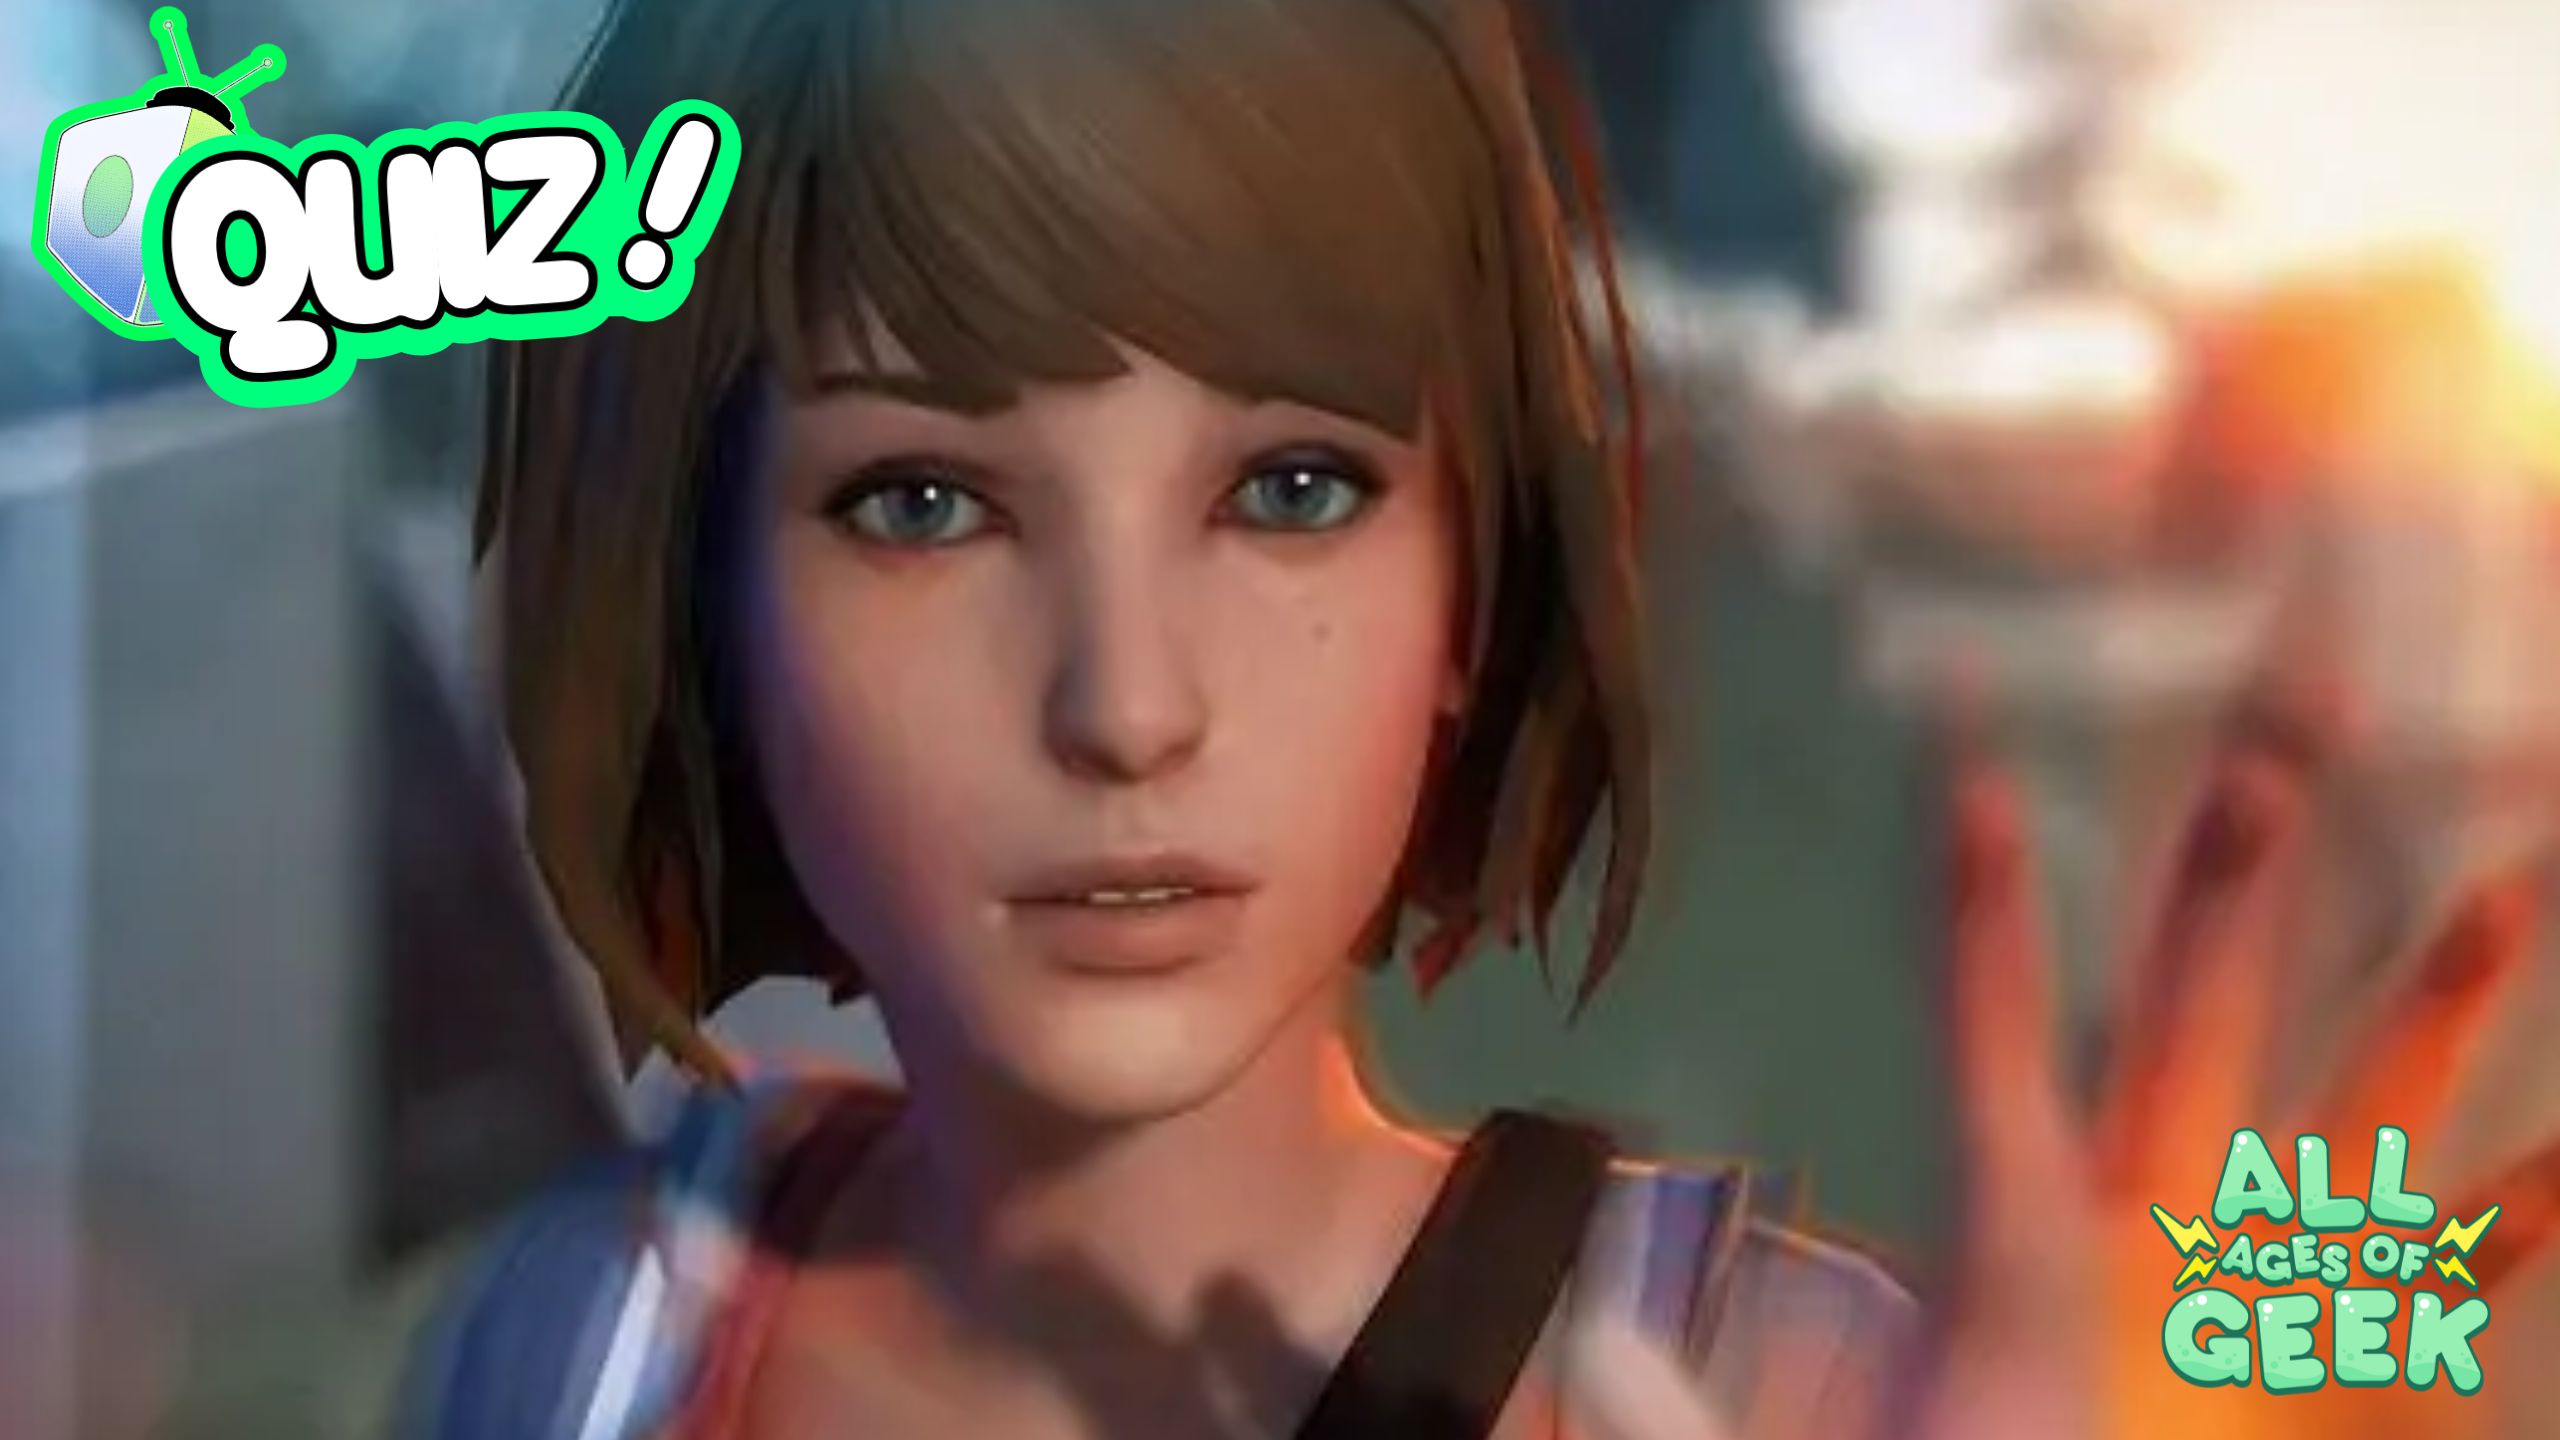 Which “Life is Strange” Character Are You? Take the Quiz to Find Out!